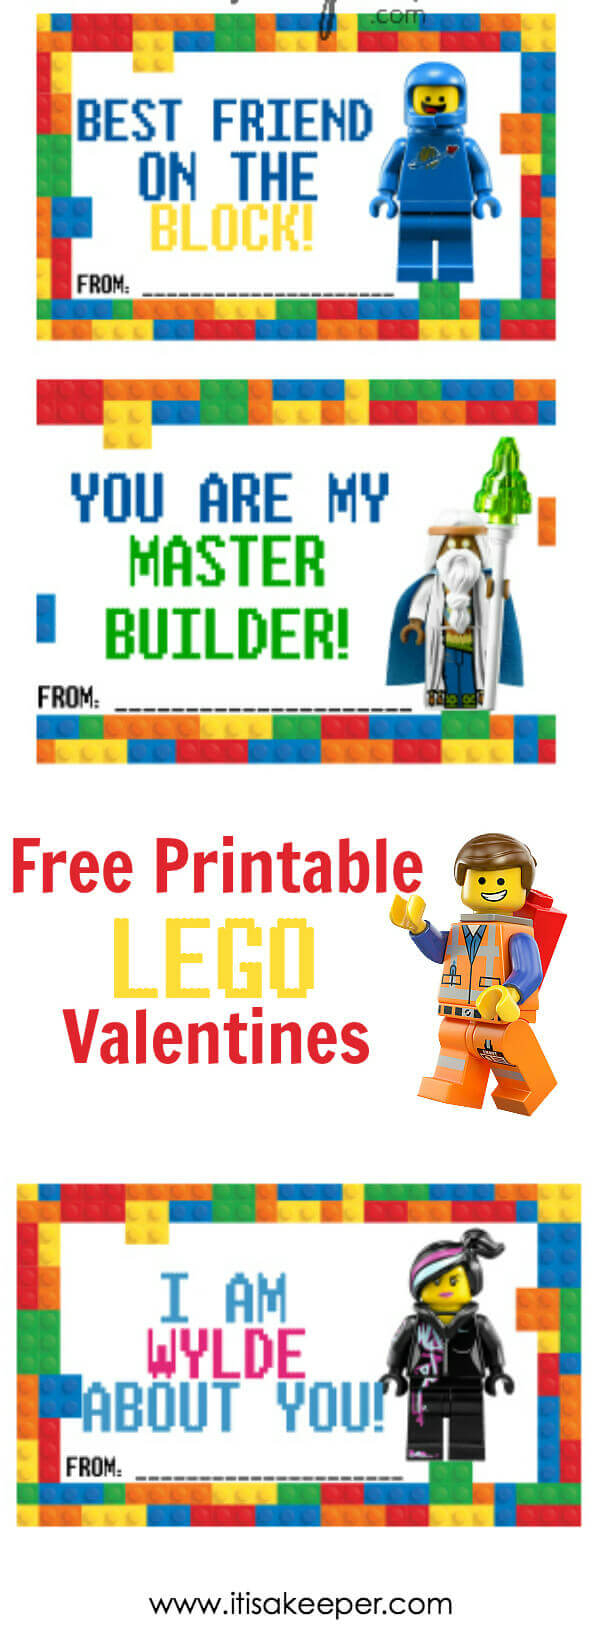 Lego Valentine Cards - Free Printable | It Is A Keeper - Free Printable Lego Star Wars Valentines